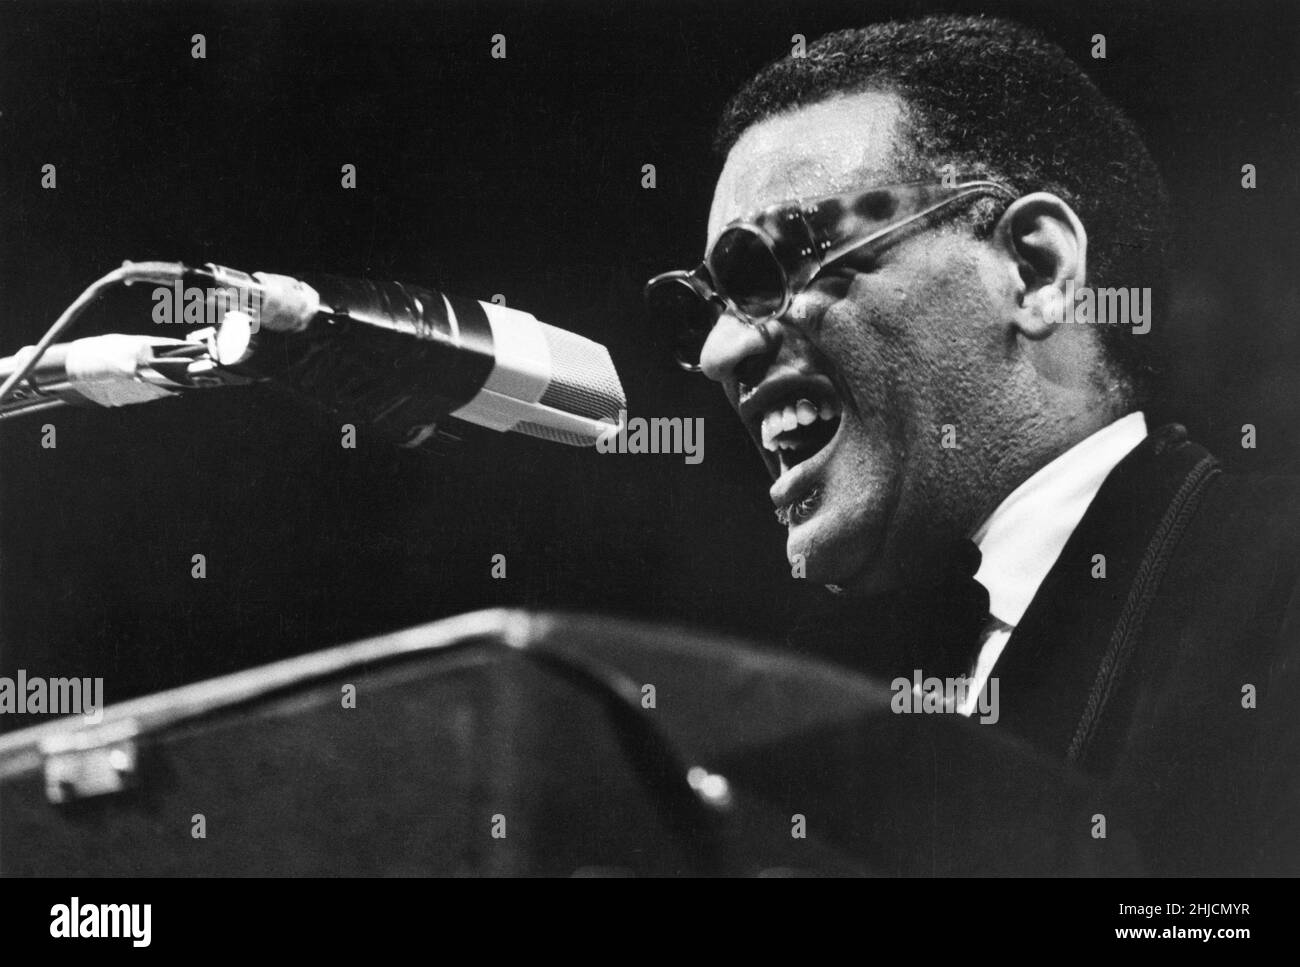 Ray Charles Robinson (September 23, 1930 - June 10, 2004) was an African- American singer, songwriter, musician, and composer who is sometimes referred to as 'The Genius'. Stock Photo